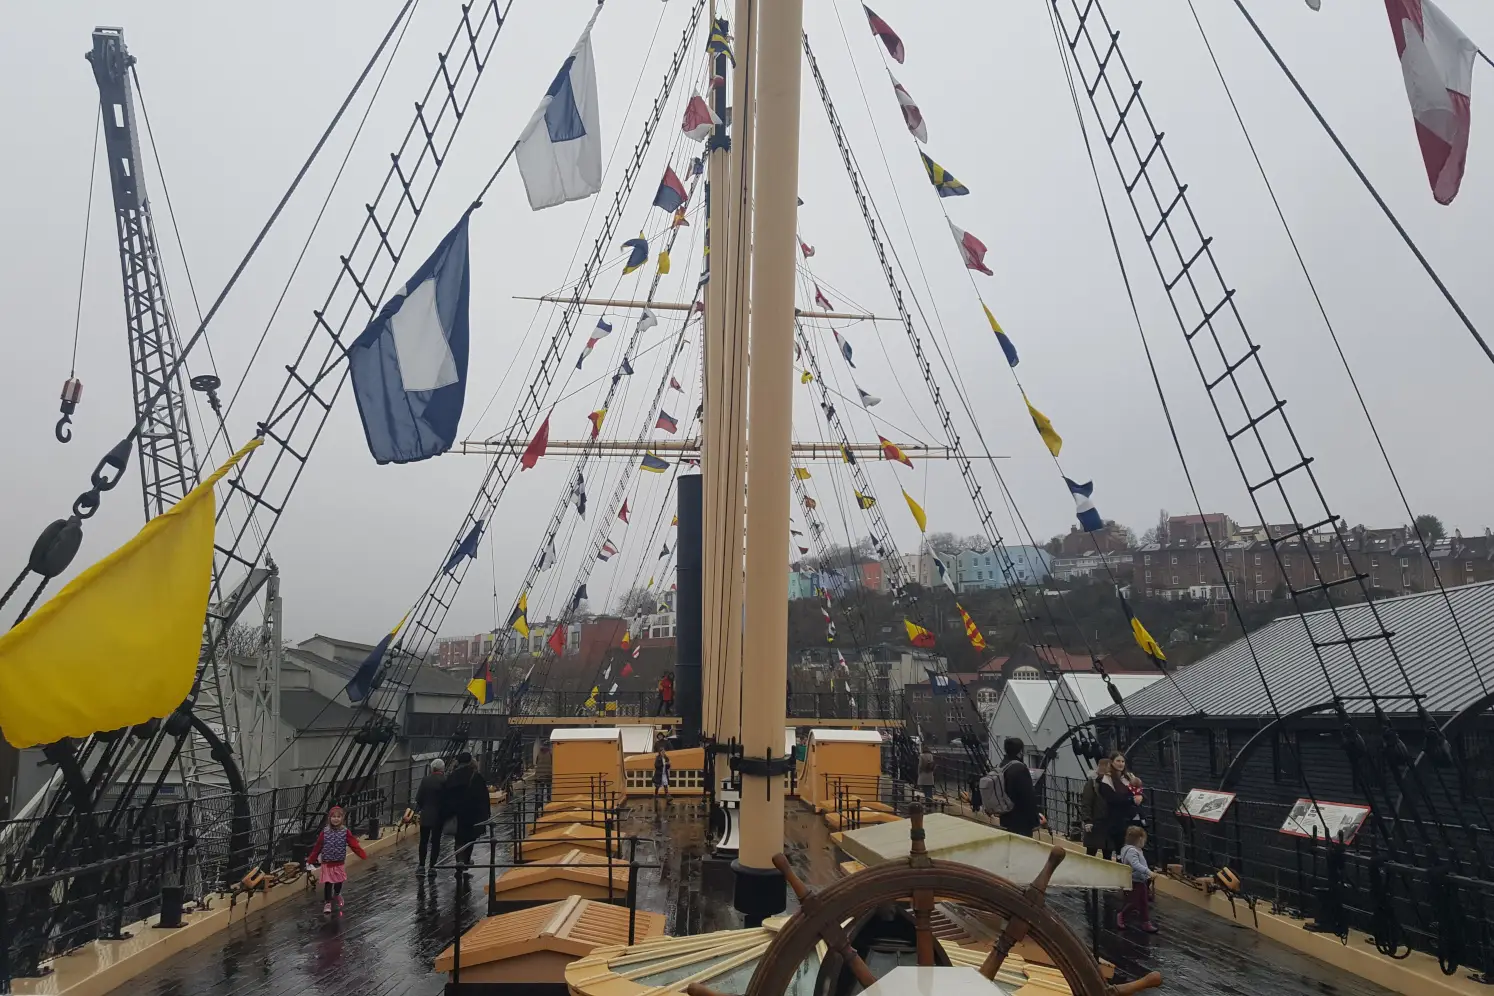 Deck of Bristol SS Great Britain with its colourful flags